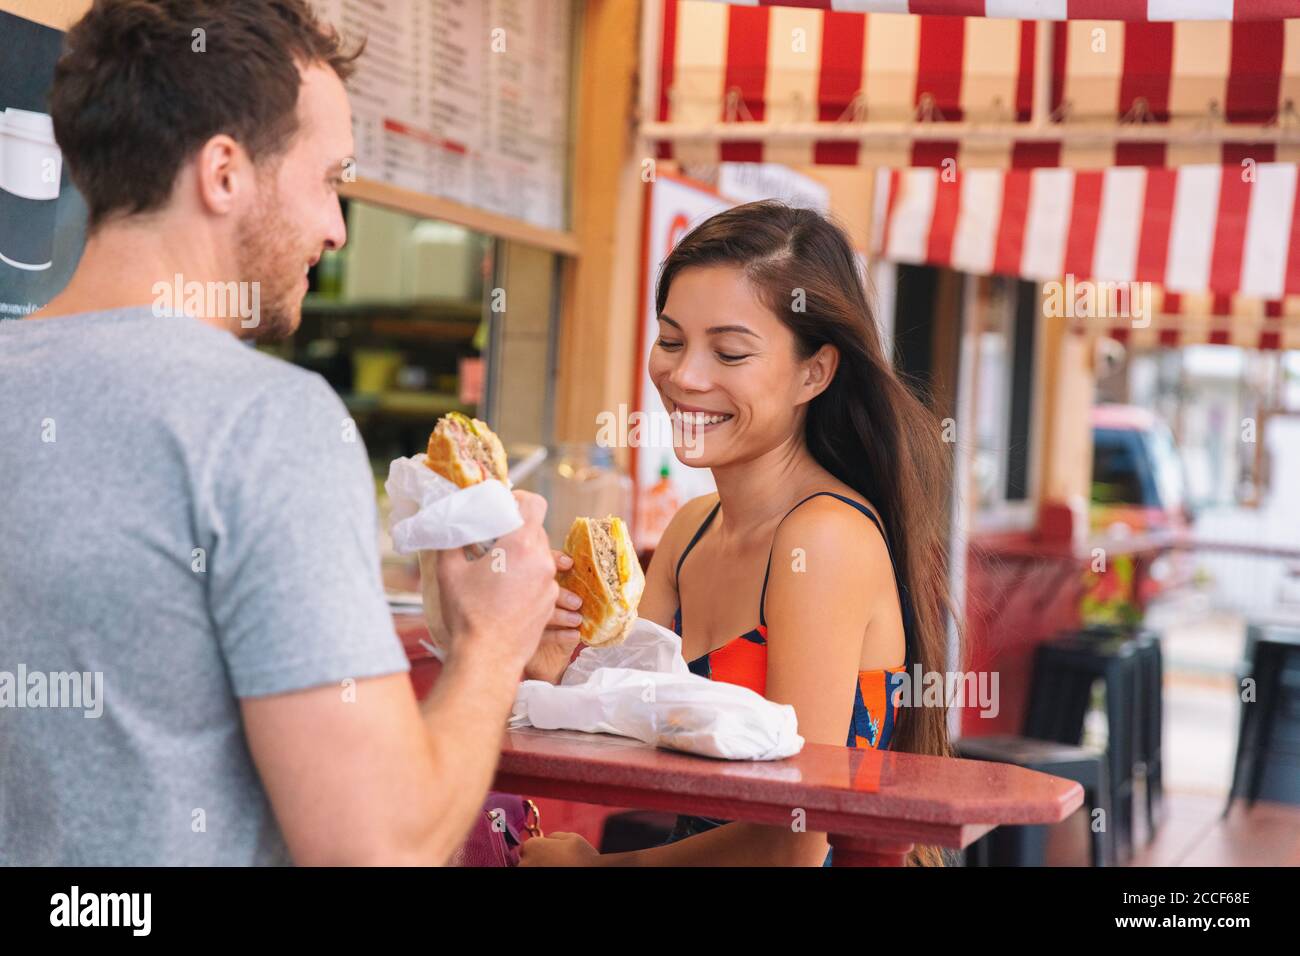 Happy couple eating sandwiches in typical retro cafe in Florida. Cuba sandwich local food. Summer travel tourist lifestyle young Asian woman smiling Stock Photo